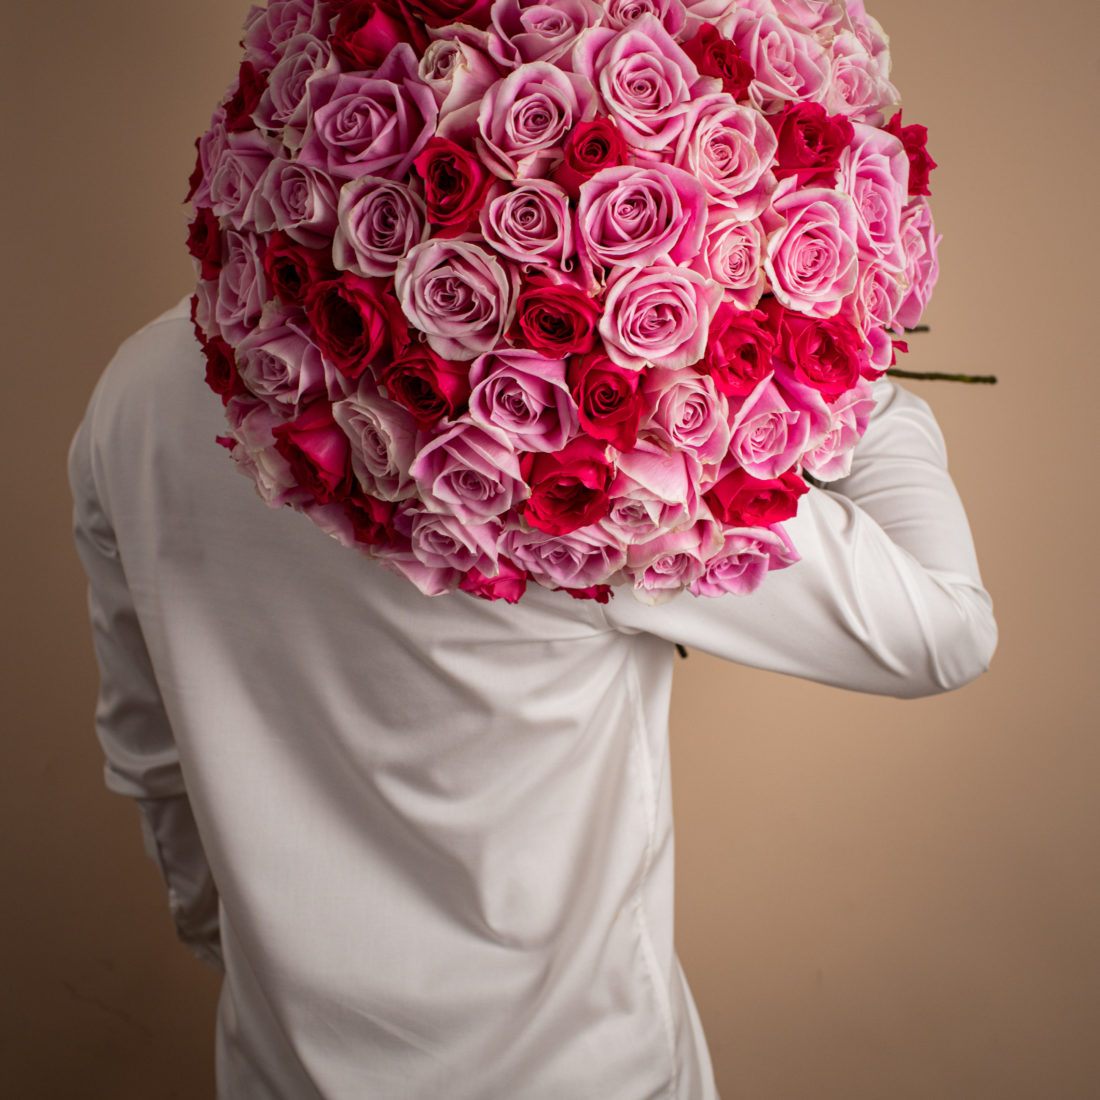 Undeniable Love | Pink and White Roses Bouquet | Online Flower Shop